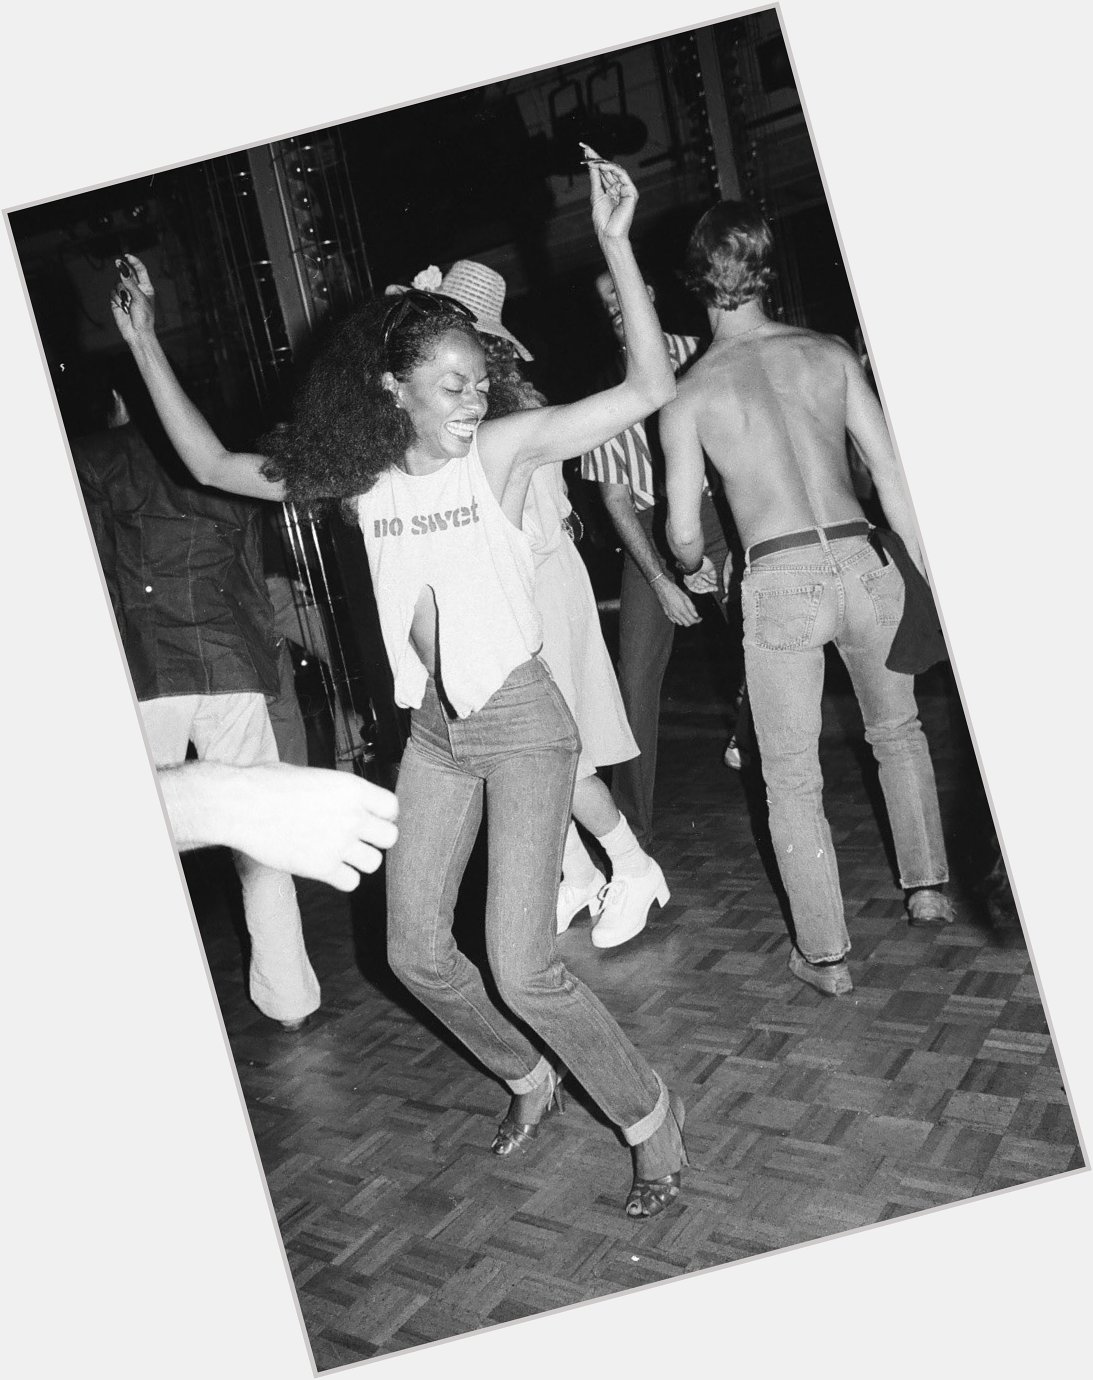 Happy Birthday to Diana Ross who I would have loved to be drunk with at studio 54 